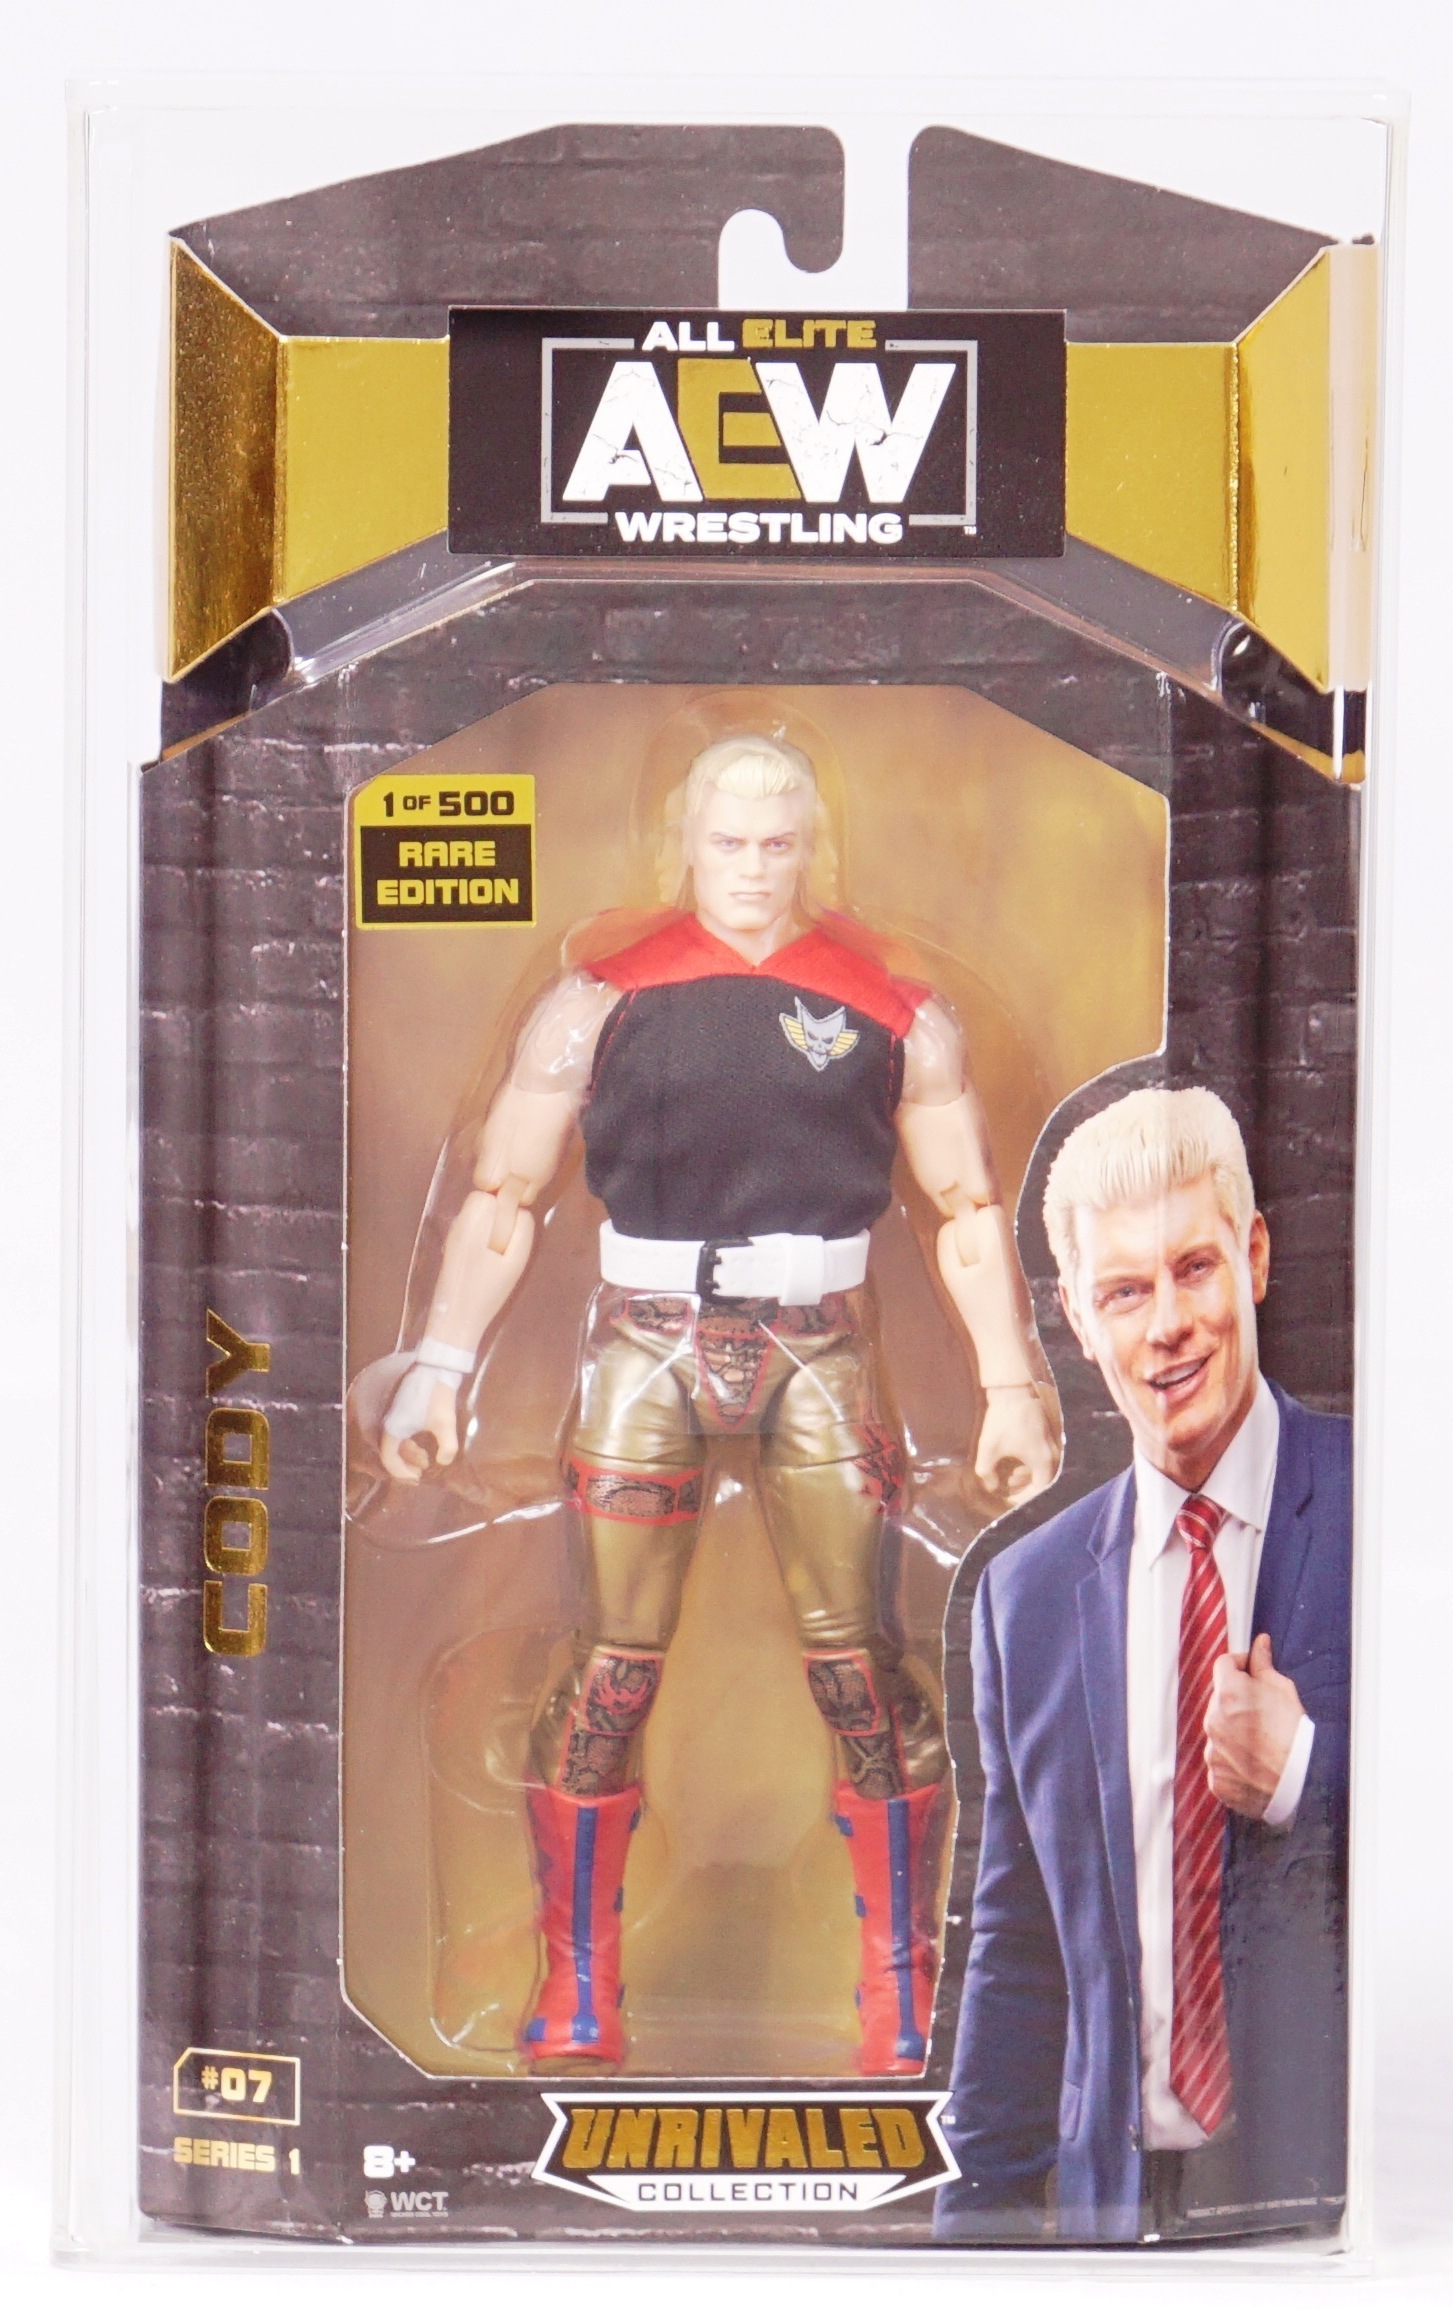 AEW UNRIVALED SERIES 13 ACTION FIGURE COLLECTION - The Toy Insider